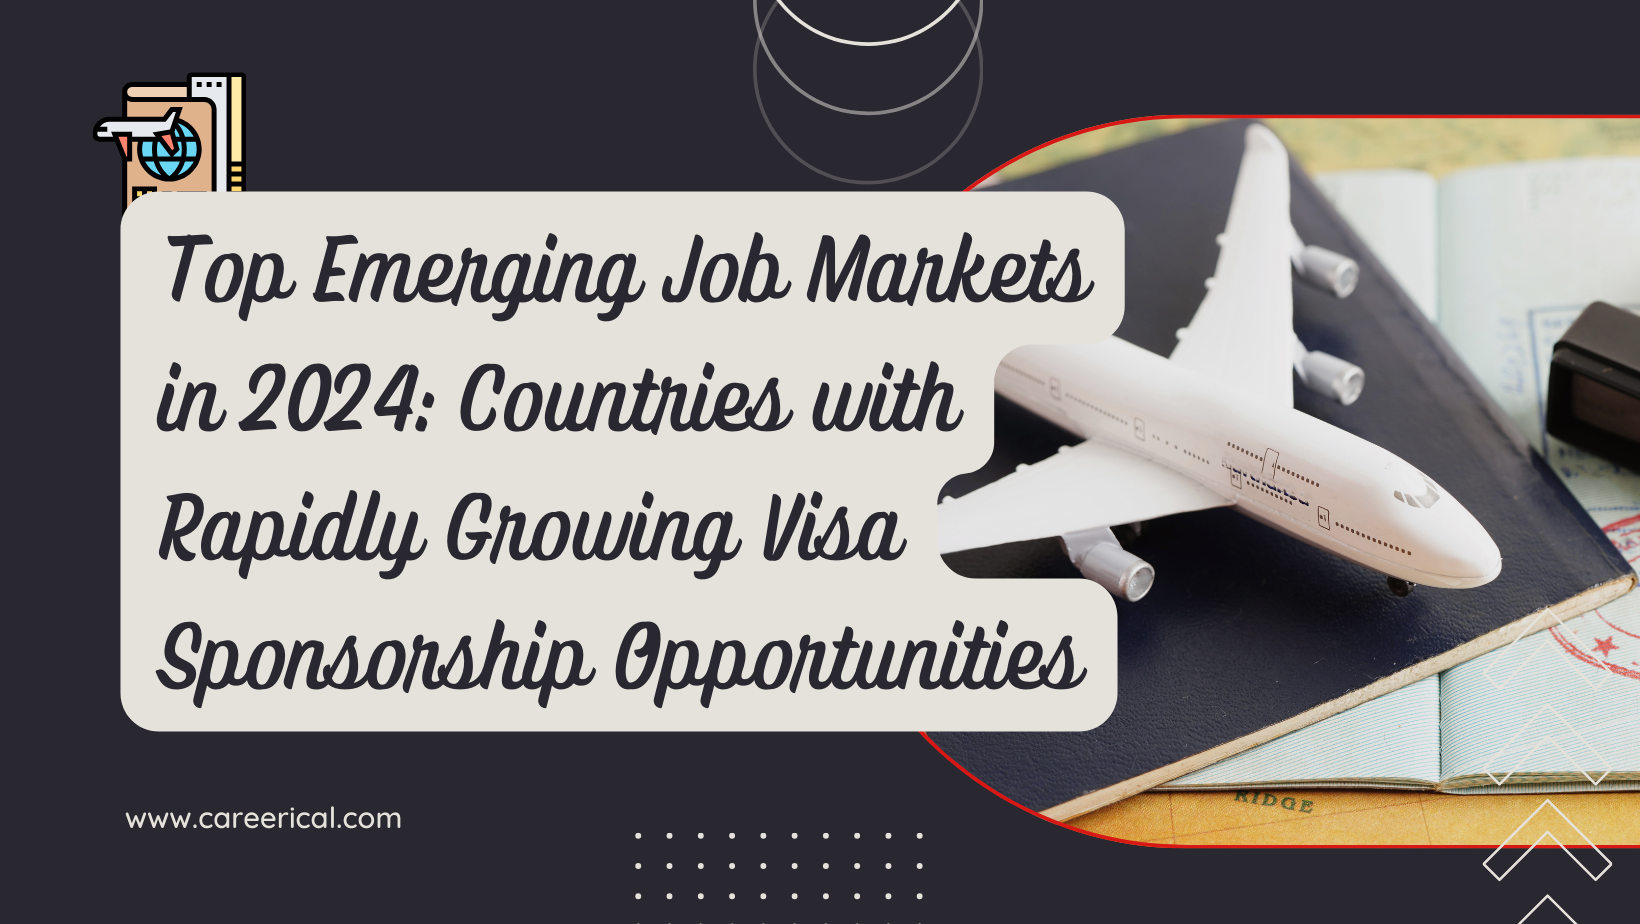 Top Emerging Job Markets in 2024: Countries with Rapidly Growing Visa Sponsorship Opportunities